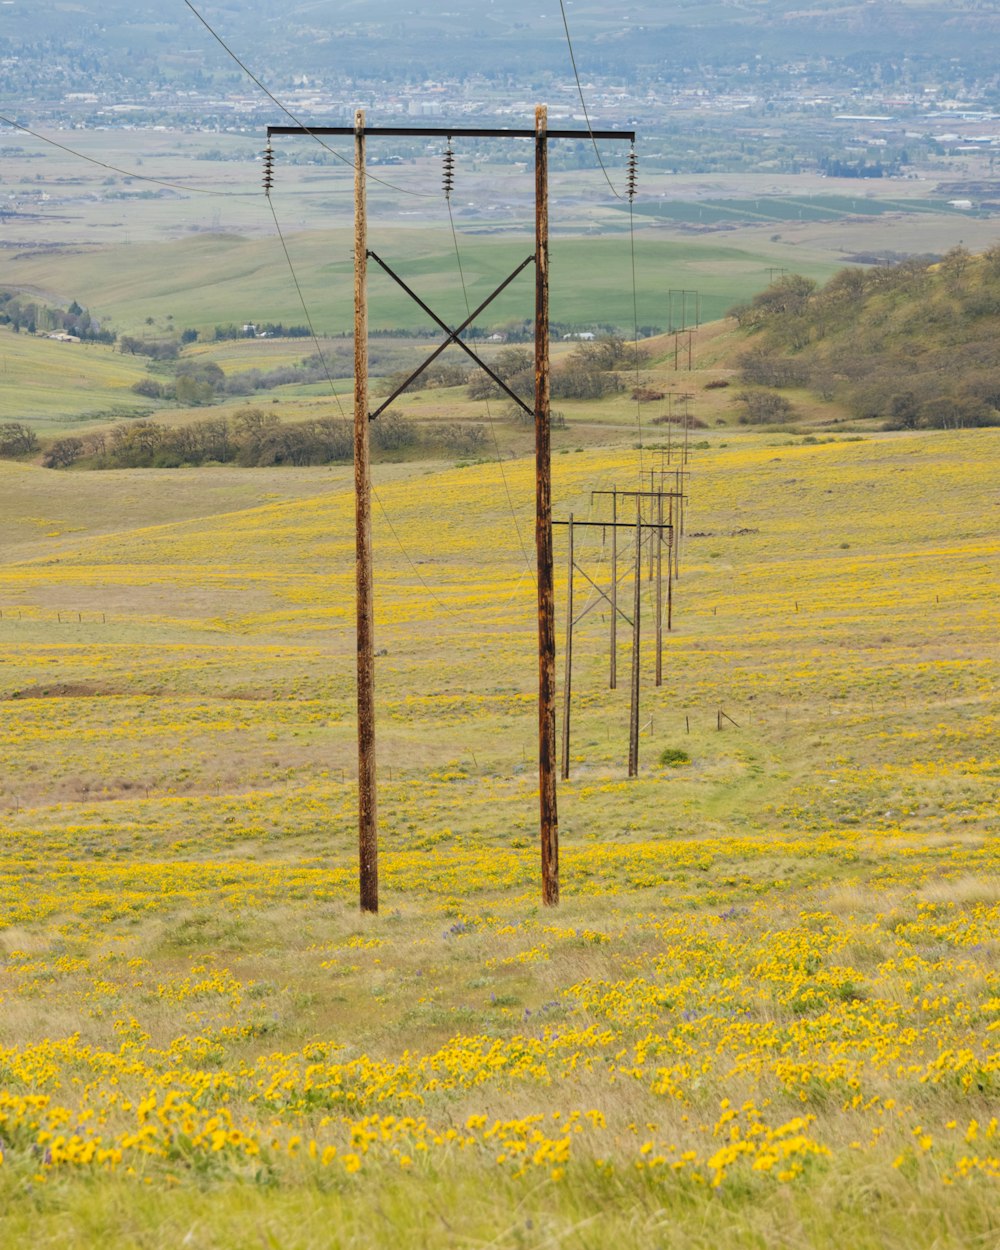 a field with yellow flowers and power lines